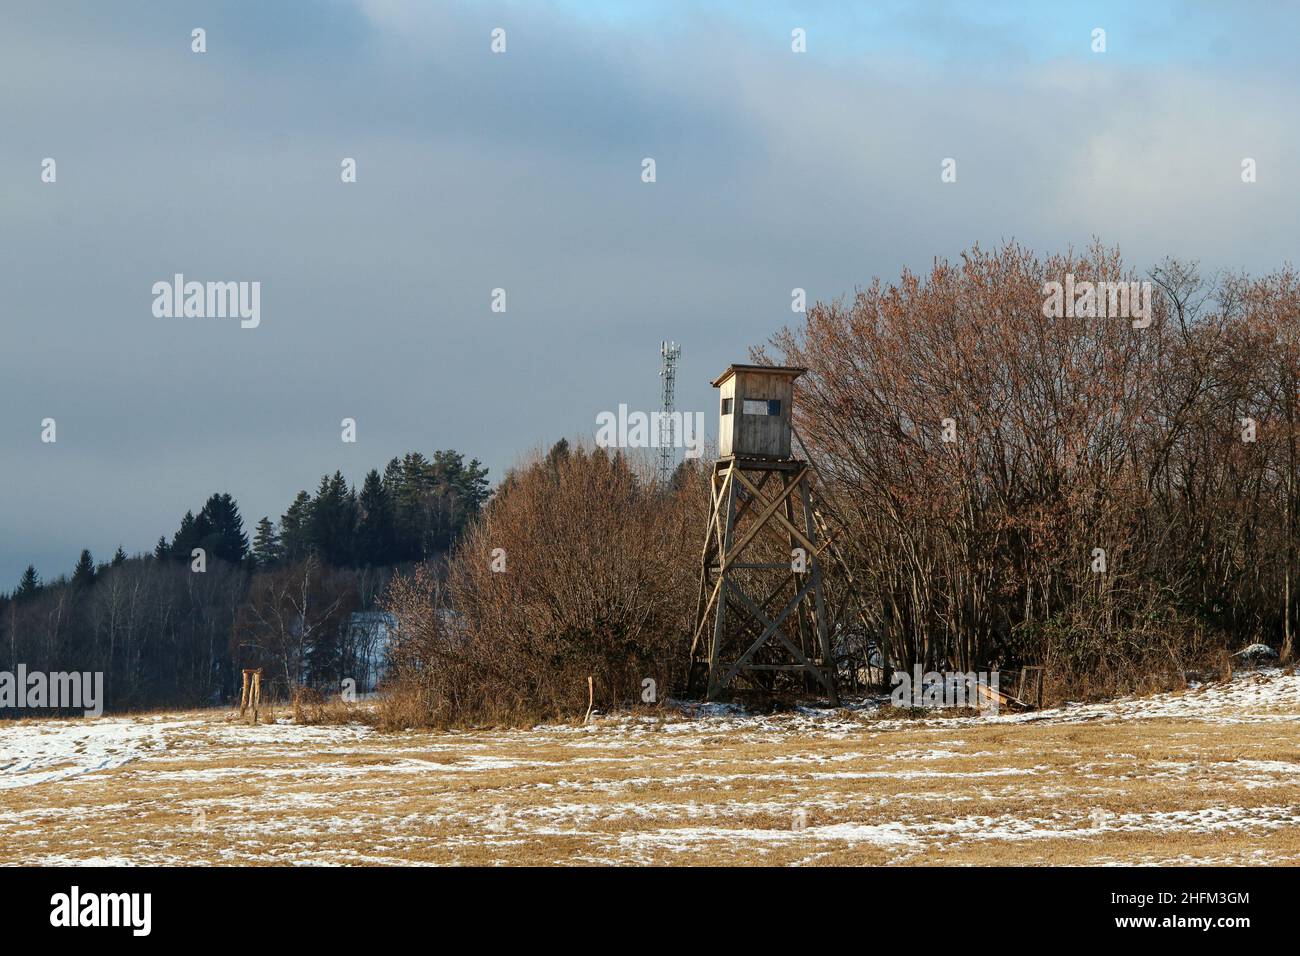 The field during the winter with the tree stand hidden in the trees. The huntsmen use it as a lookout and hiding place. Stock Photo